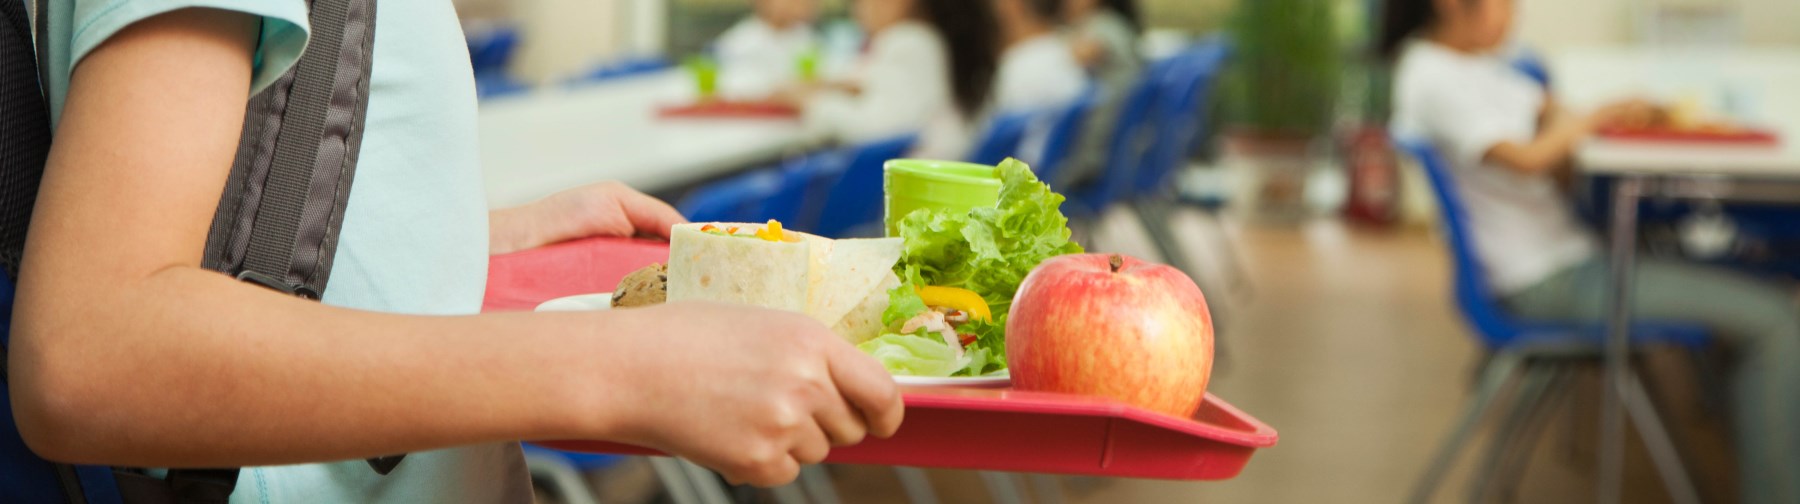 student carrying a lunch tray with a sandwich and apple through the a school cafeteria